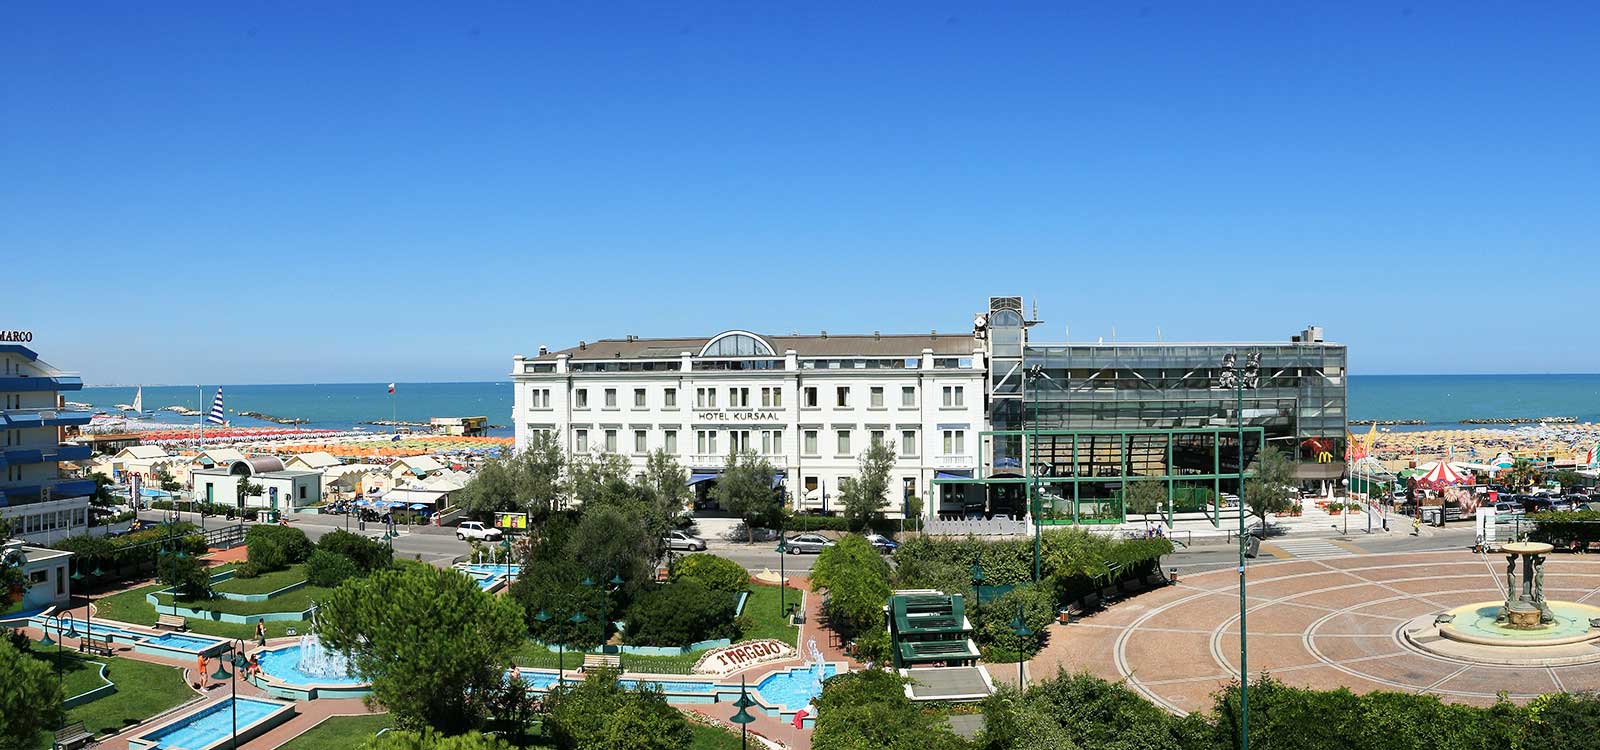 Panoramic view of the hotel and the square